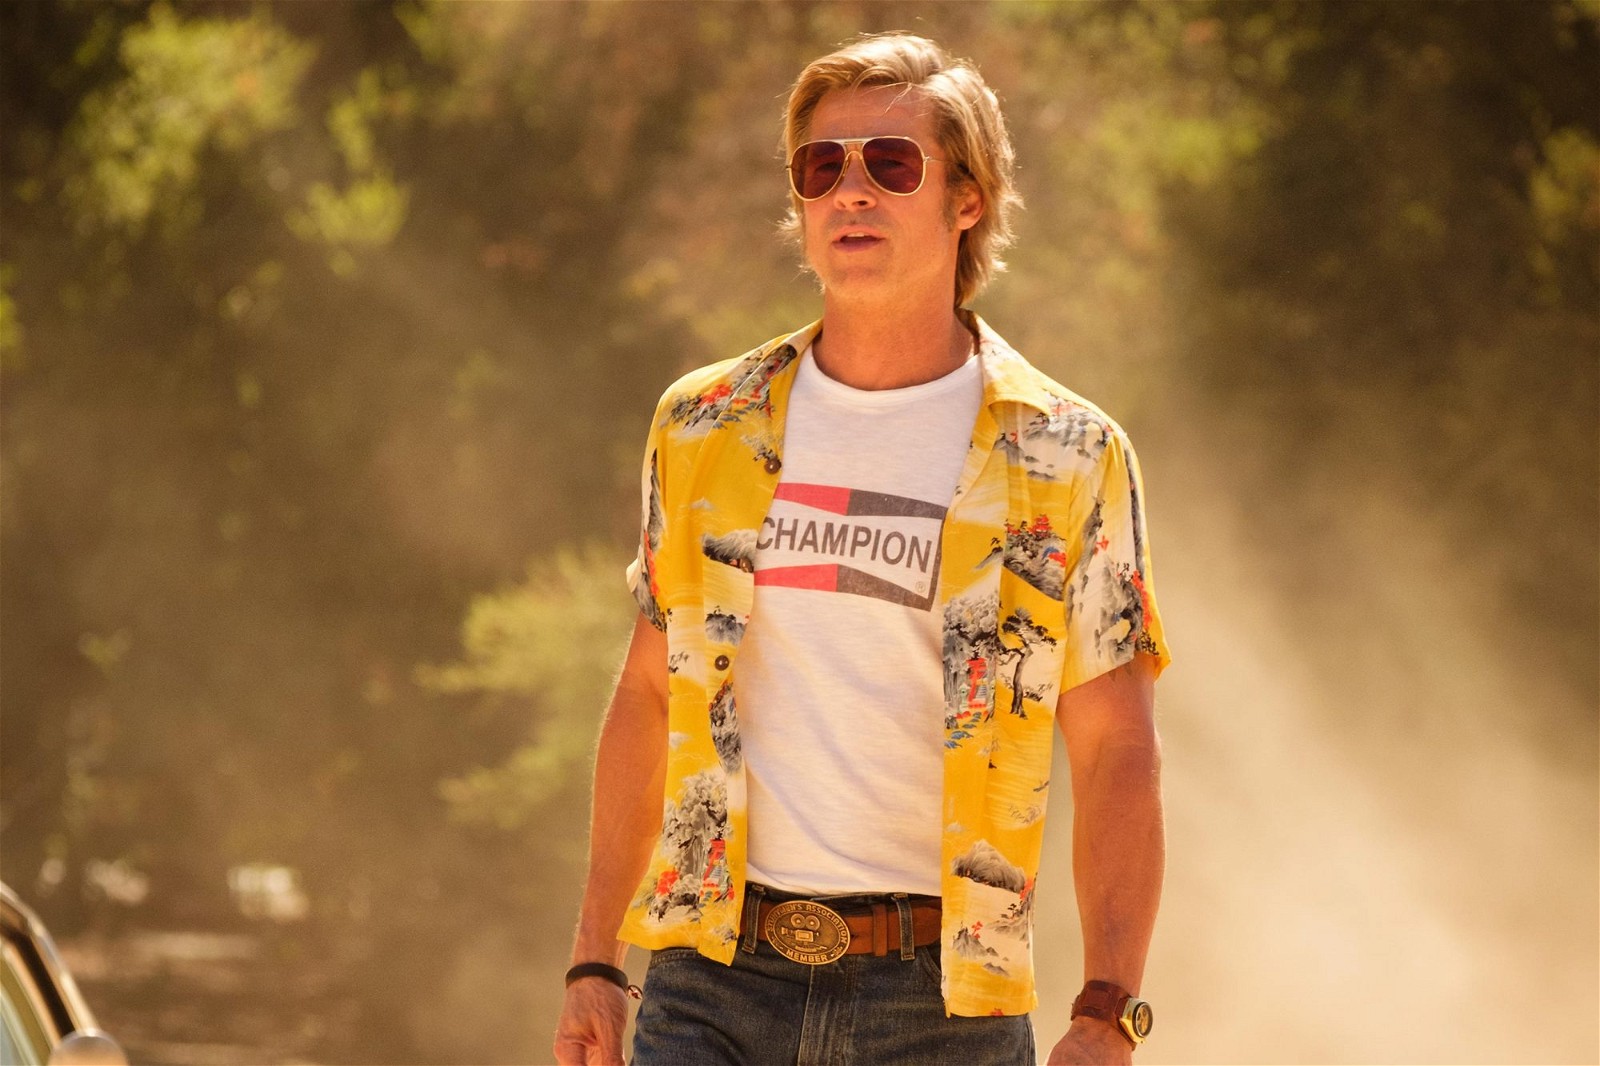 Brad Pitt in Once Upon a Time in Hollywood